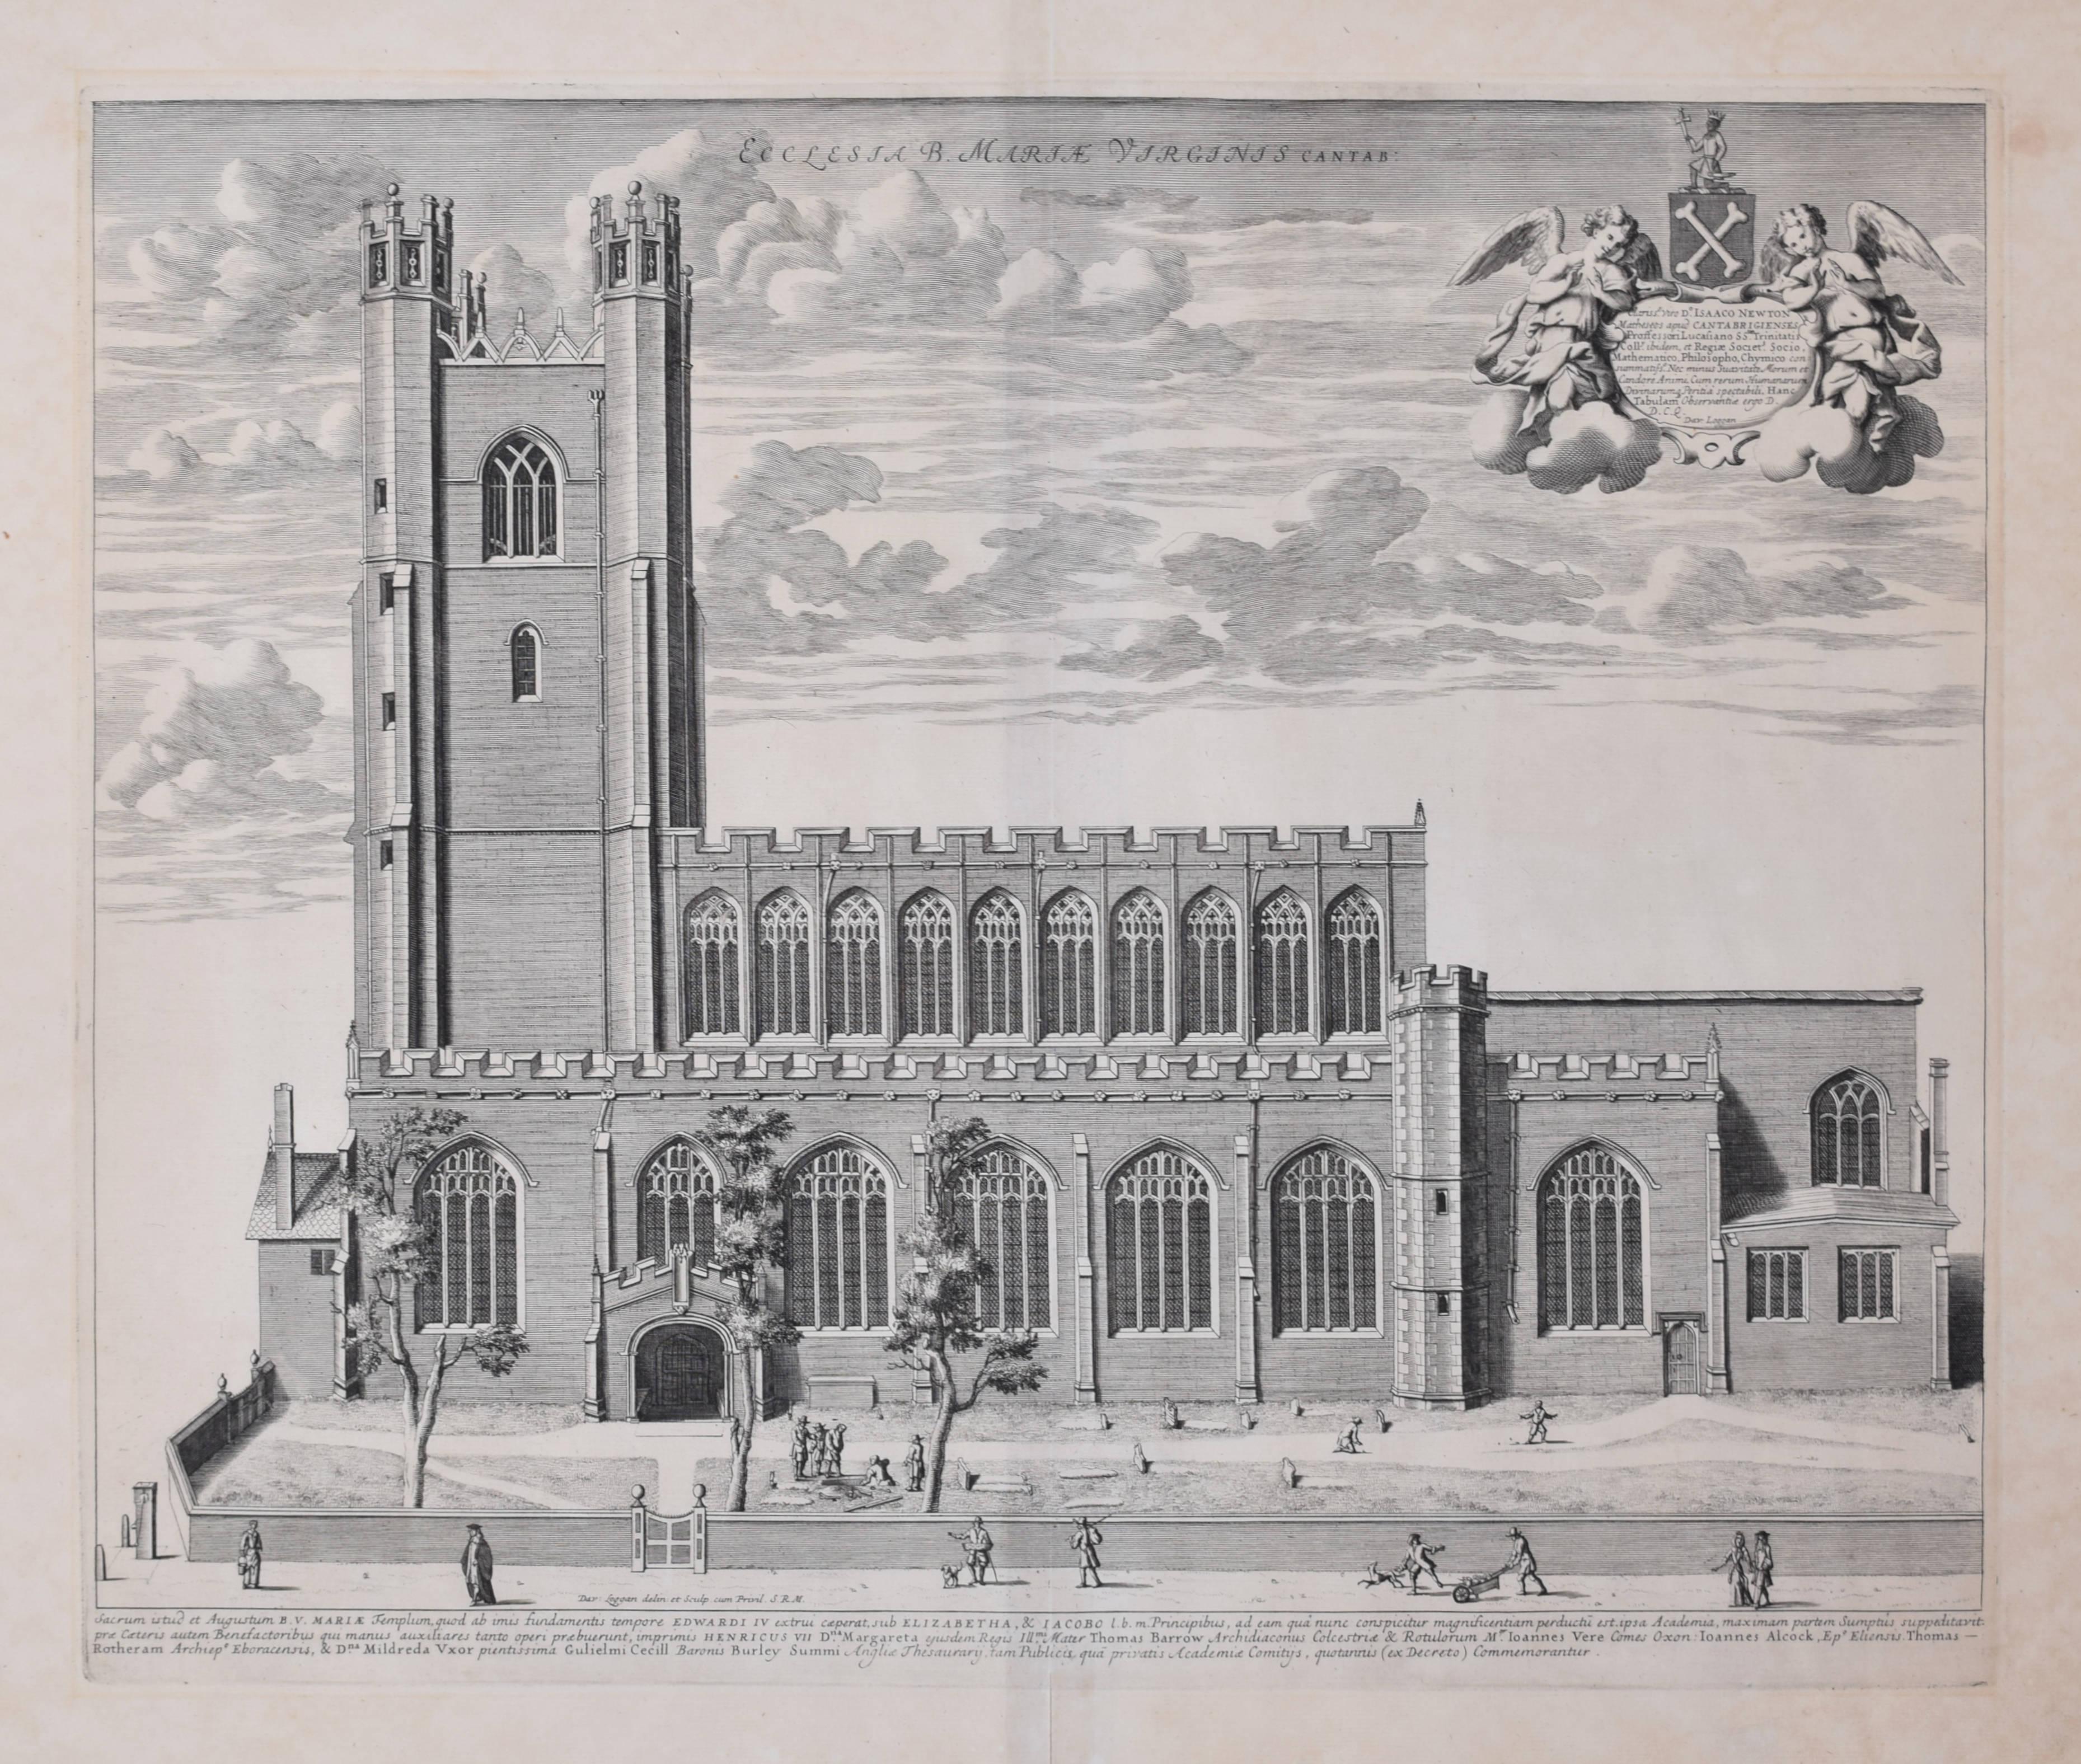 To see our other views of Oxford and Cambridge, scroll down to "More from this Seller" and below it click on "See all from this seller" - or send us a message if you cannot find the view you want.

David Loggan (1634 - 1692)
The Church of St Mary